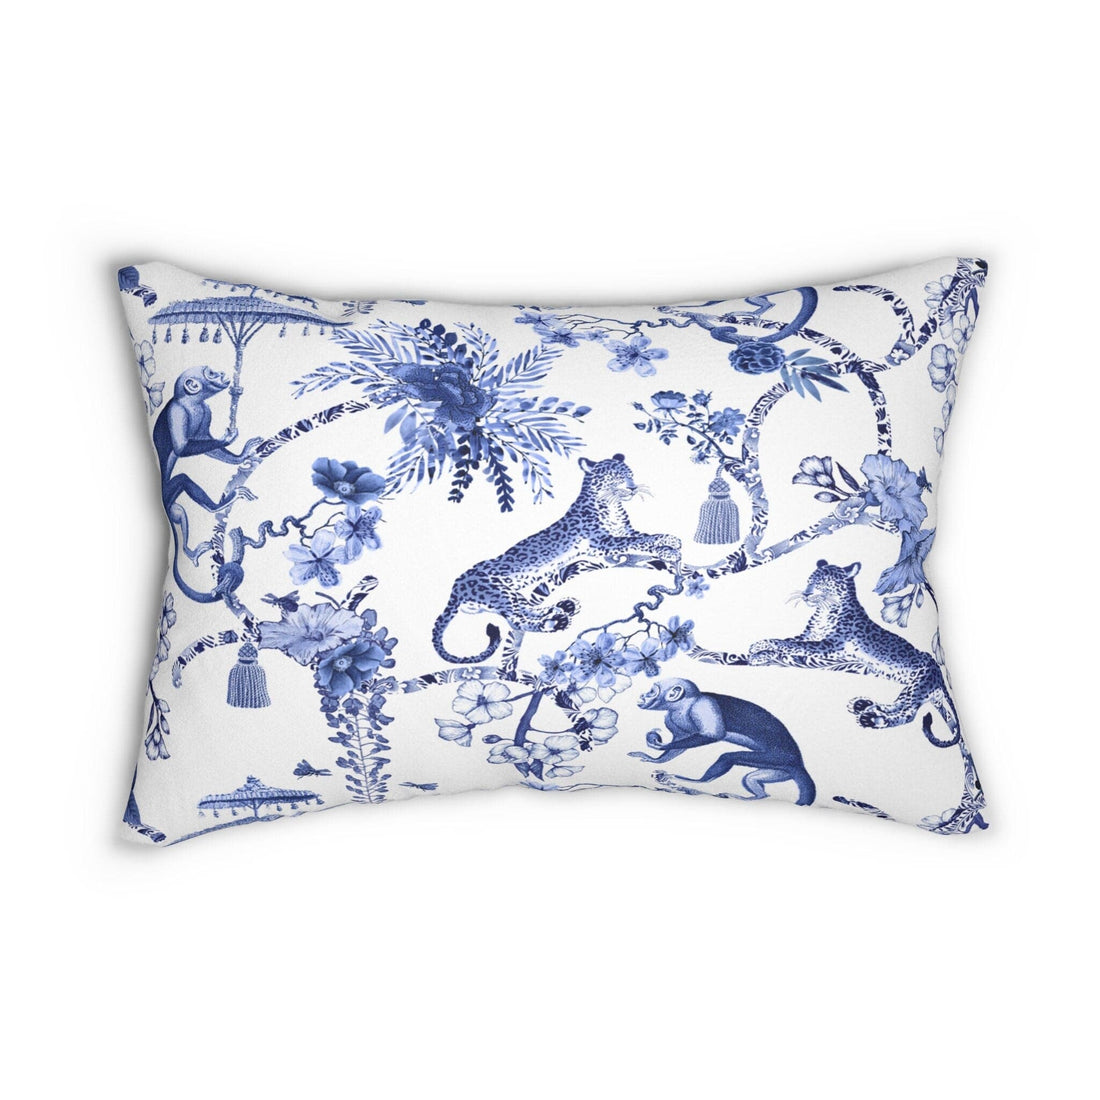 Kate McEnroe New York Chinoiserie Lumbar Pillow, Botanical Toile Bedding Collection, Floral Blue and White Chinoiserie Toile Throw Pillow with InsertThrow Pillows28157272031391349351